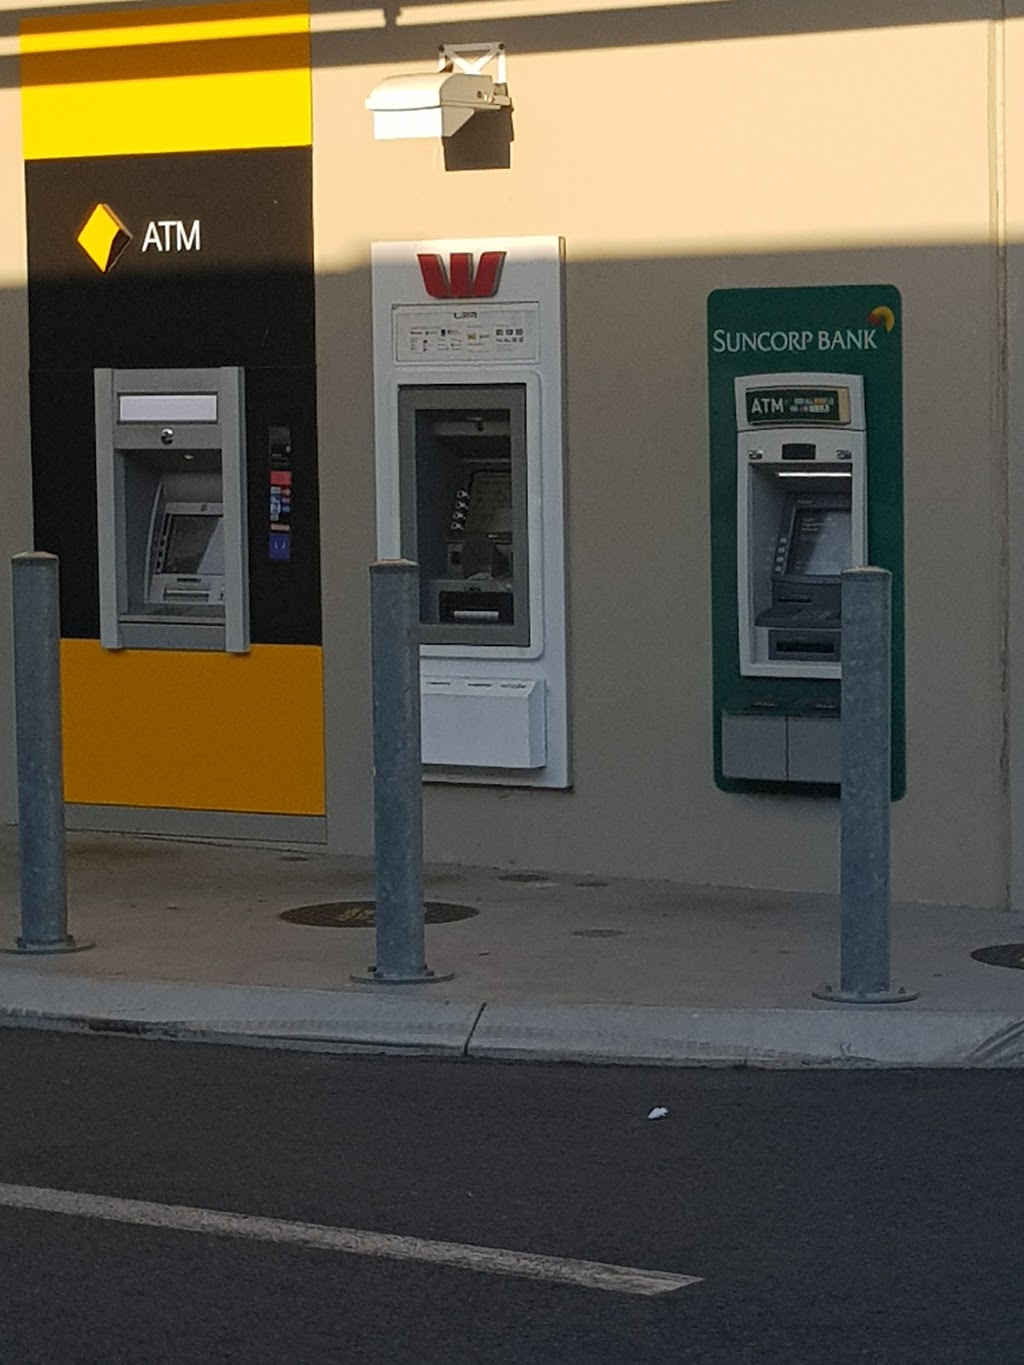 Suncorp Bank ATM | bank | 219/247 Anzac Ave, Marian QLD 4753, Australia | 131155 OR +61 131155